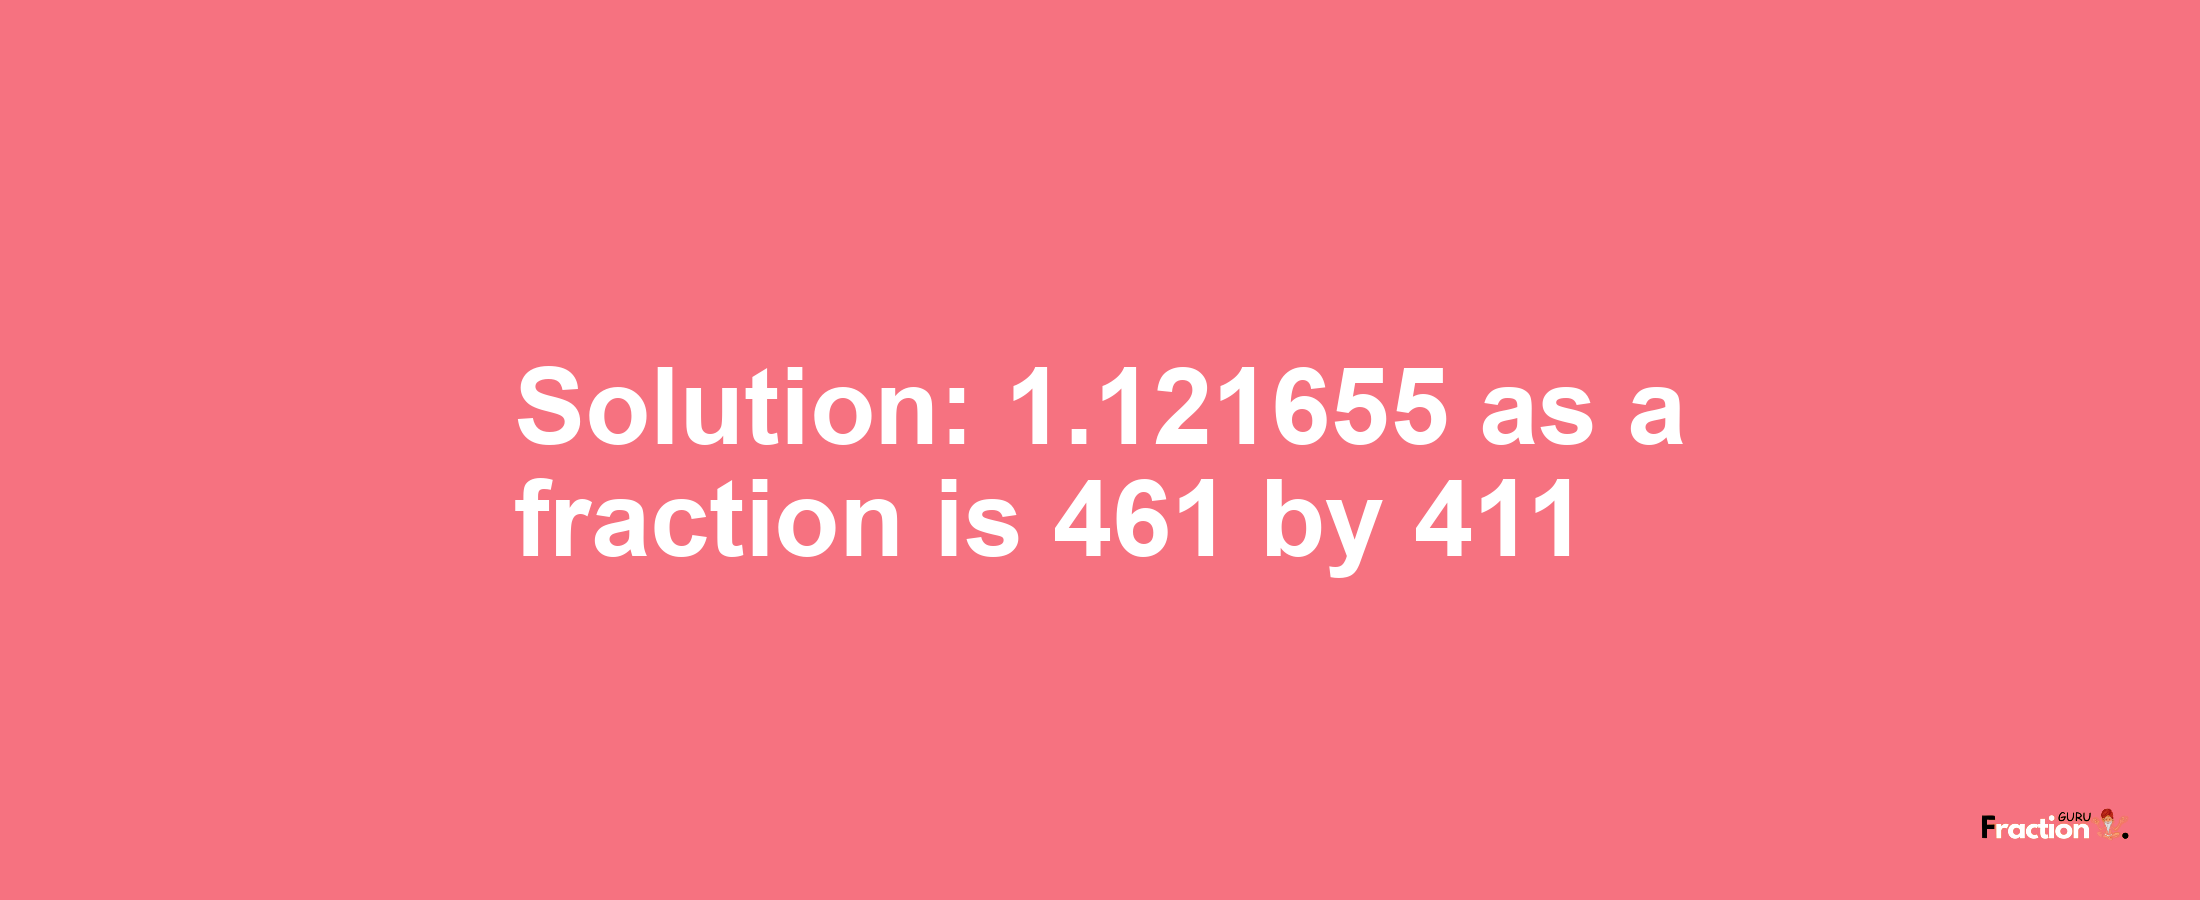 Solution:1.121655 as a fraction is 461/411